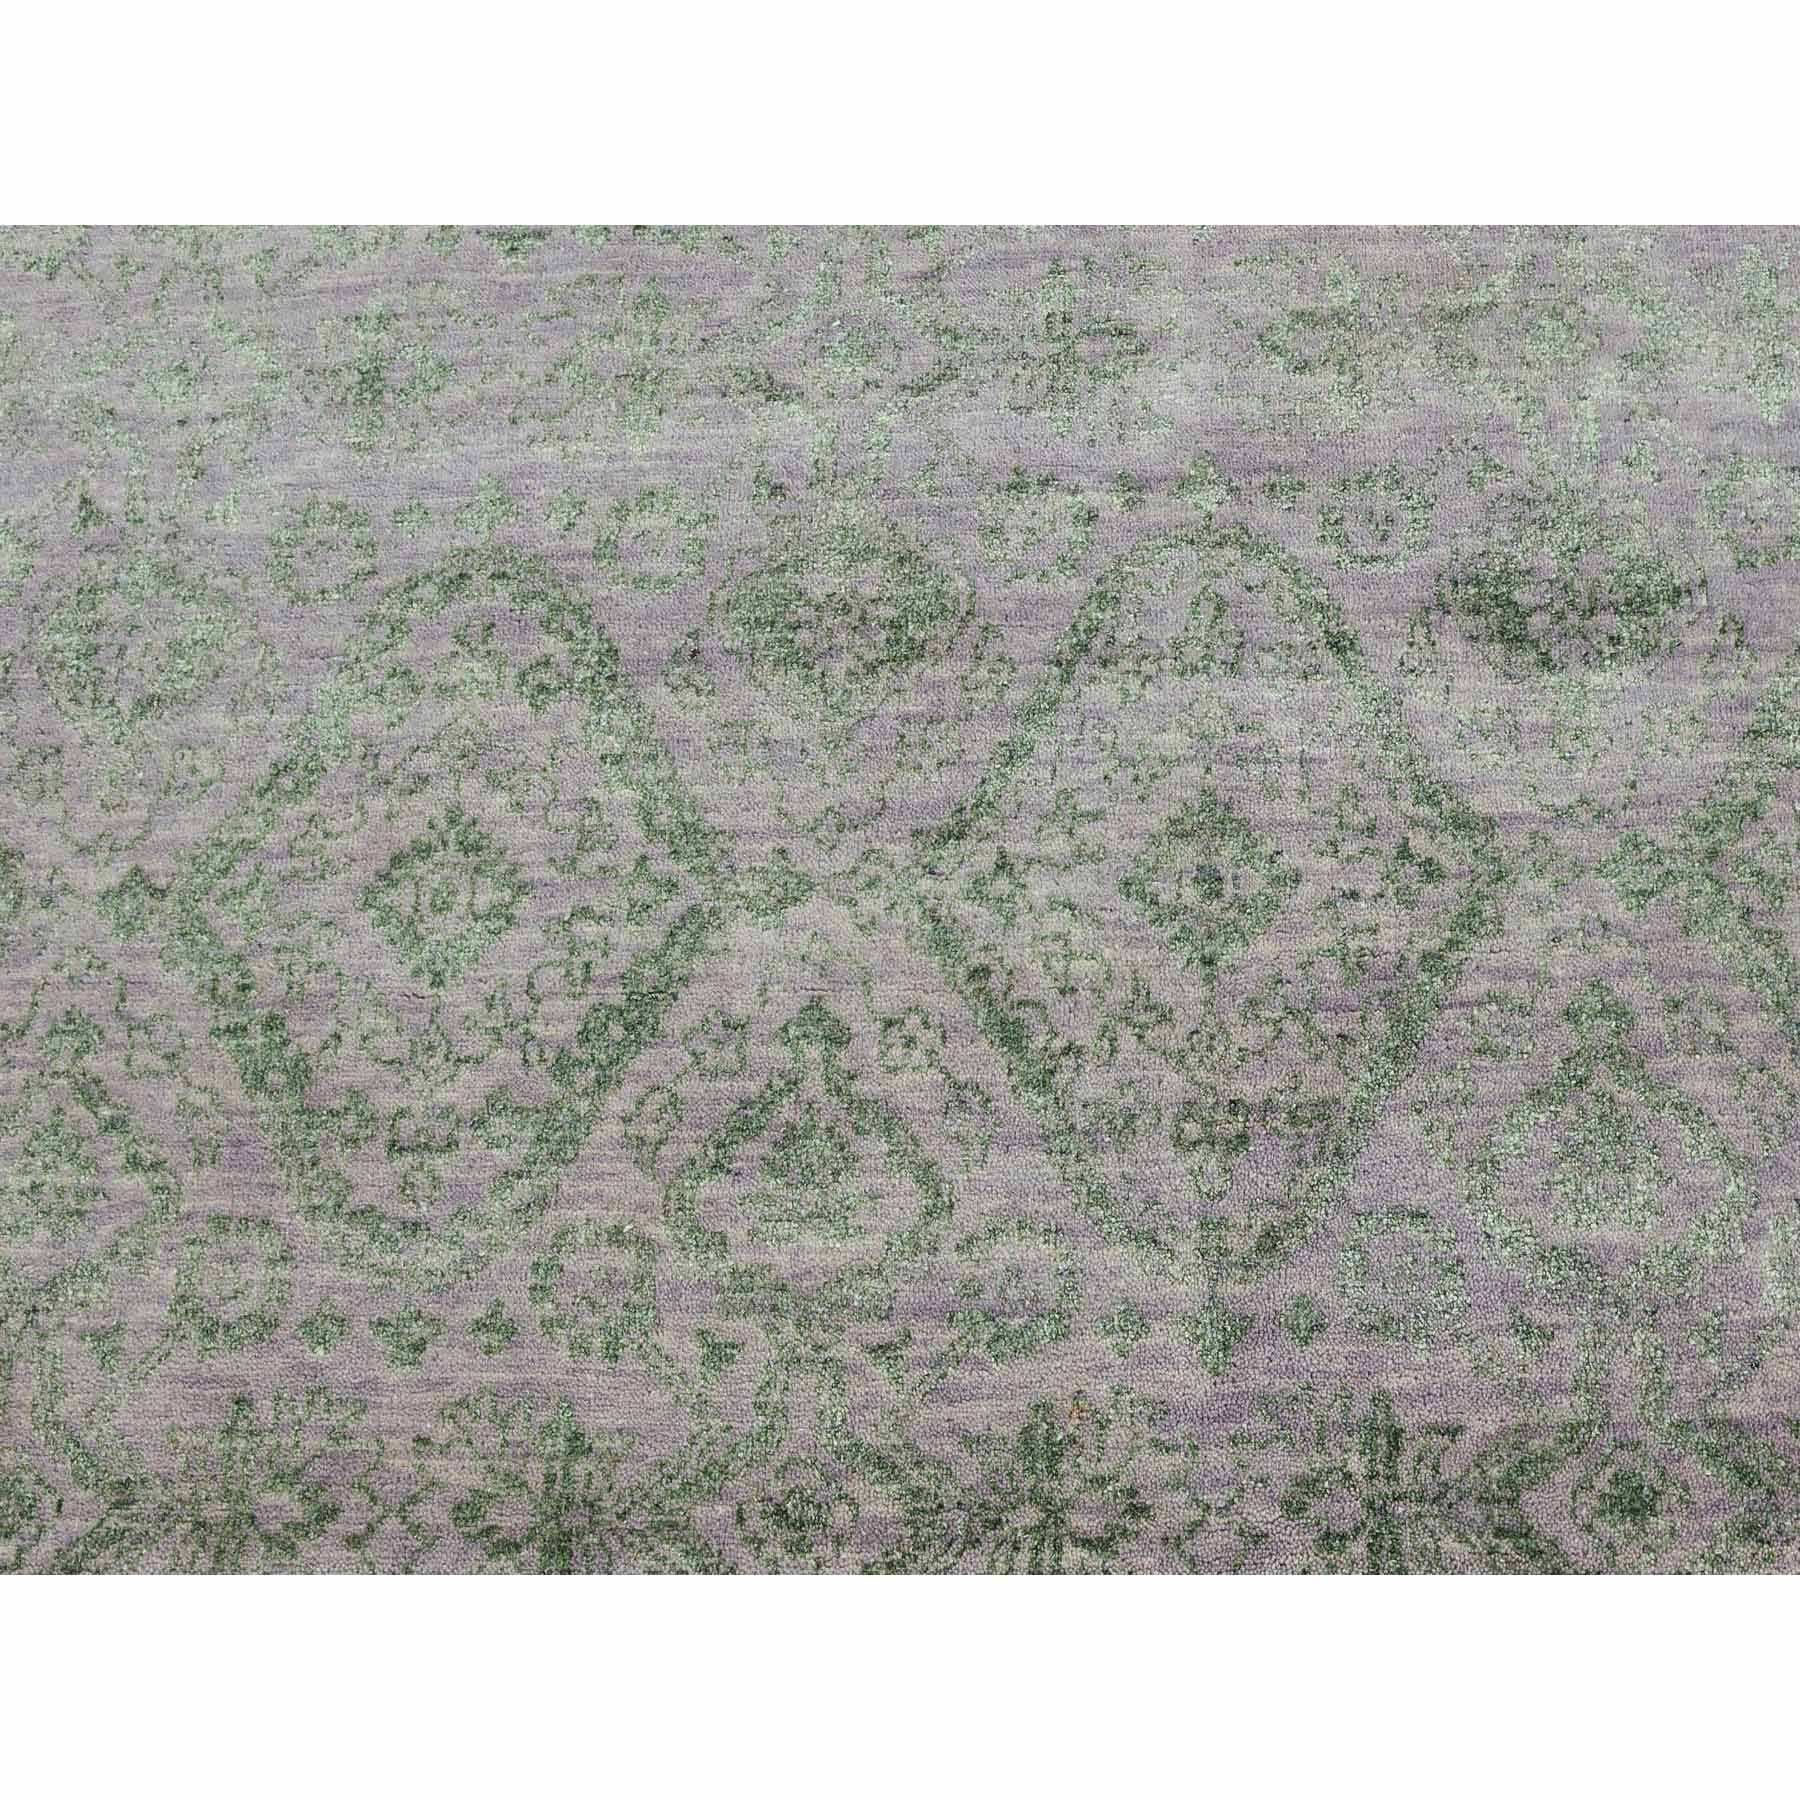 9'x11'10" Gray with Mix of Green, Transitional Agra Design with Repetitive Rosset Pattern, Wool and Silk Hand Woven, Oriental Rug 